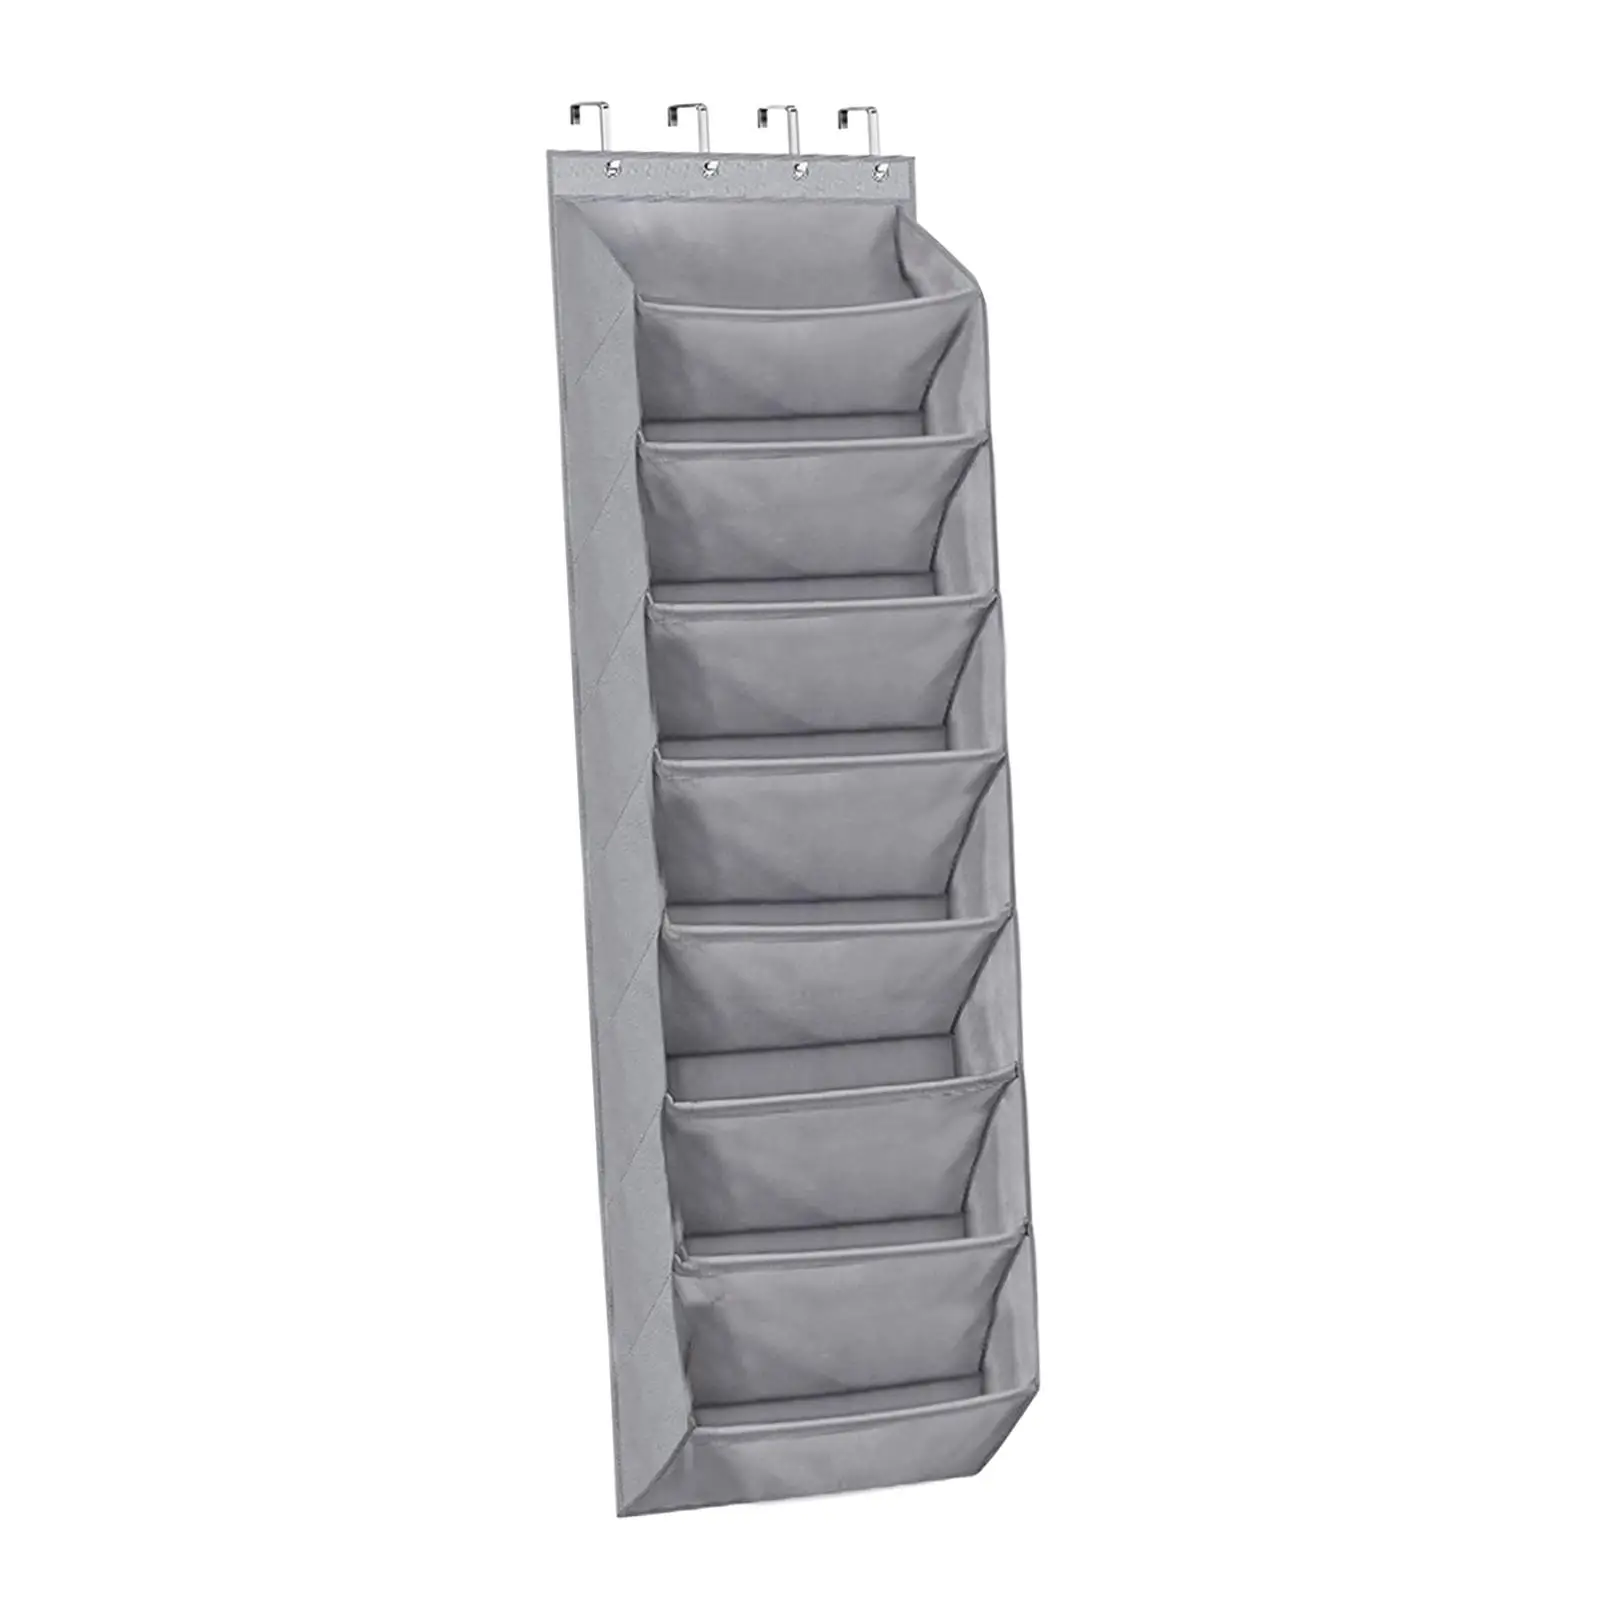 Hanging Shoe Rack 8 Tier Oxford Cloth Resuable for Kids Adults Large Deep Pockets Door Shoe Rack for Baby Items Clothing